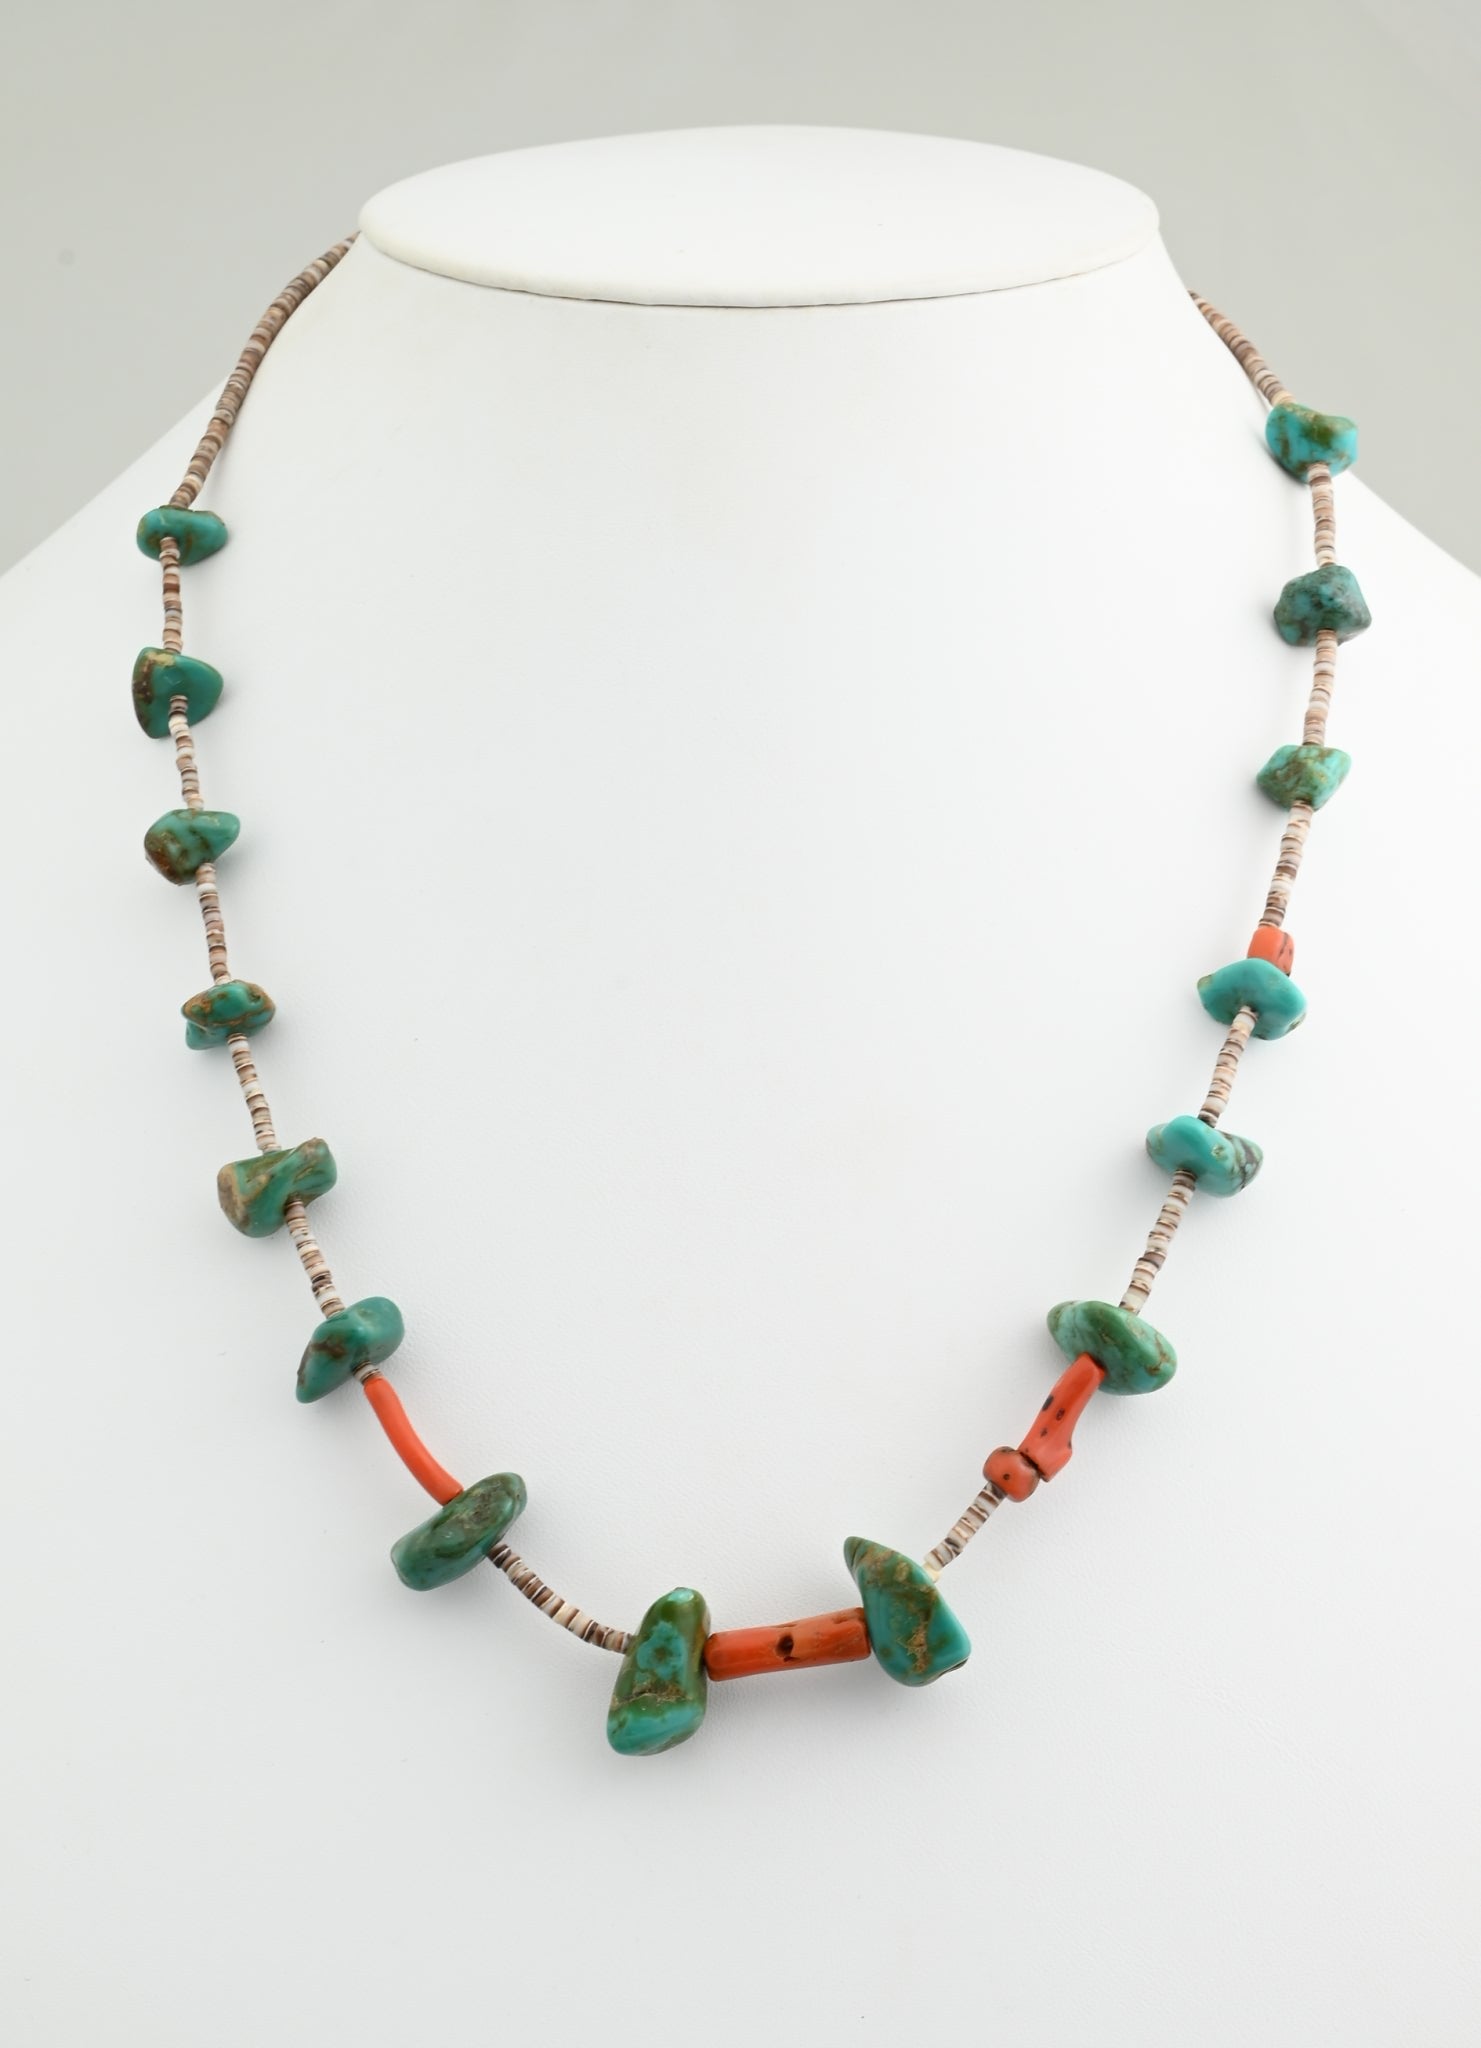 Necklace with Heishi and Turquoise Nuggets; Vintage